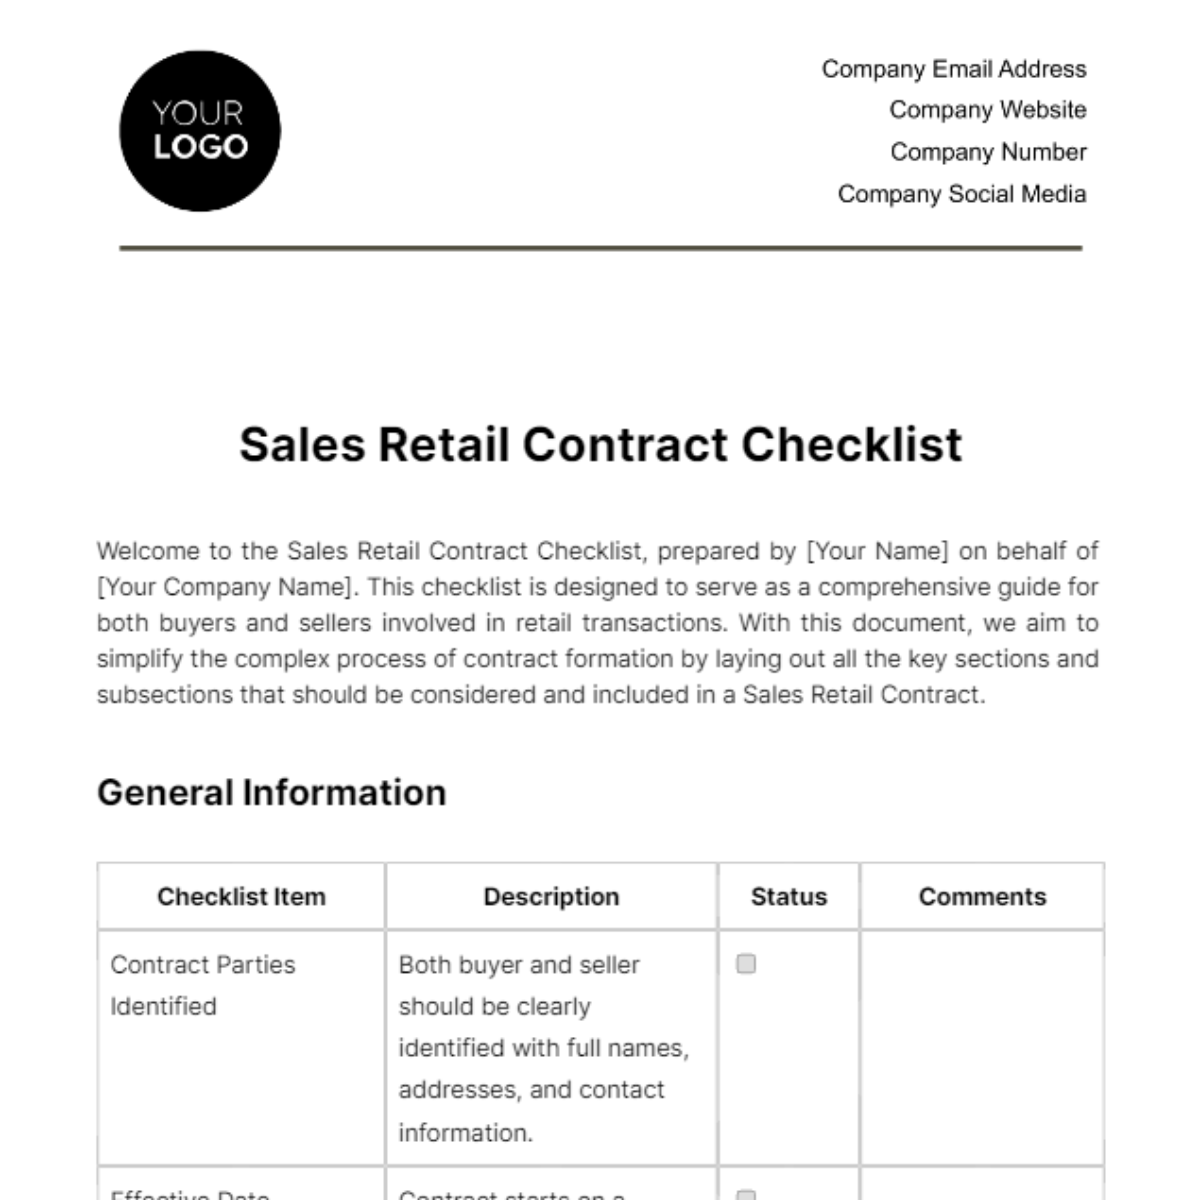 Free Sales Retail Contract Checklist Template